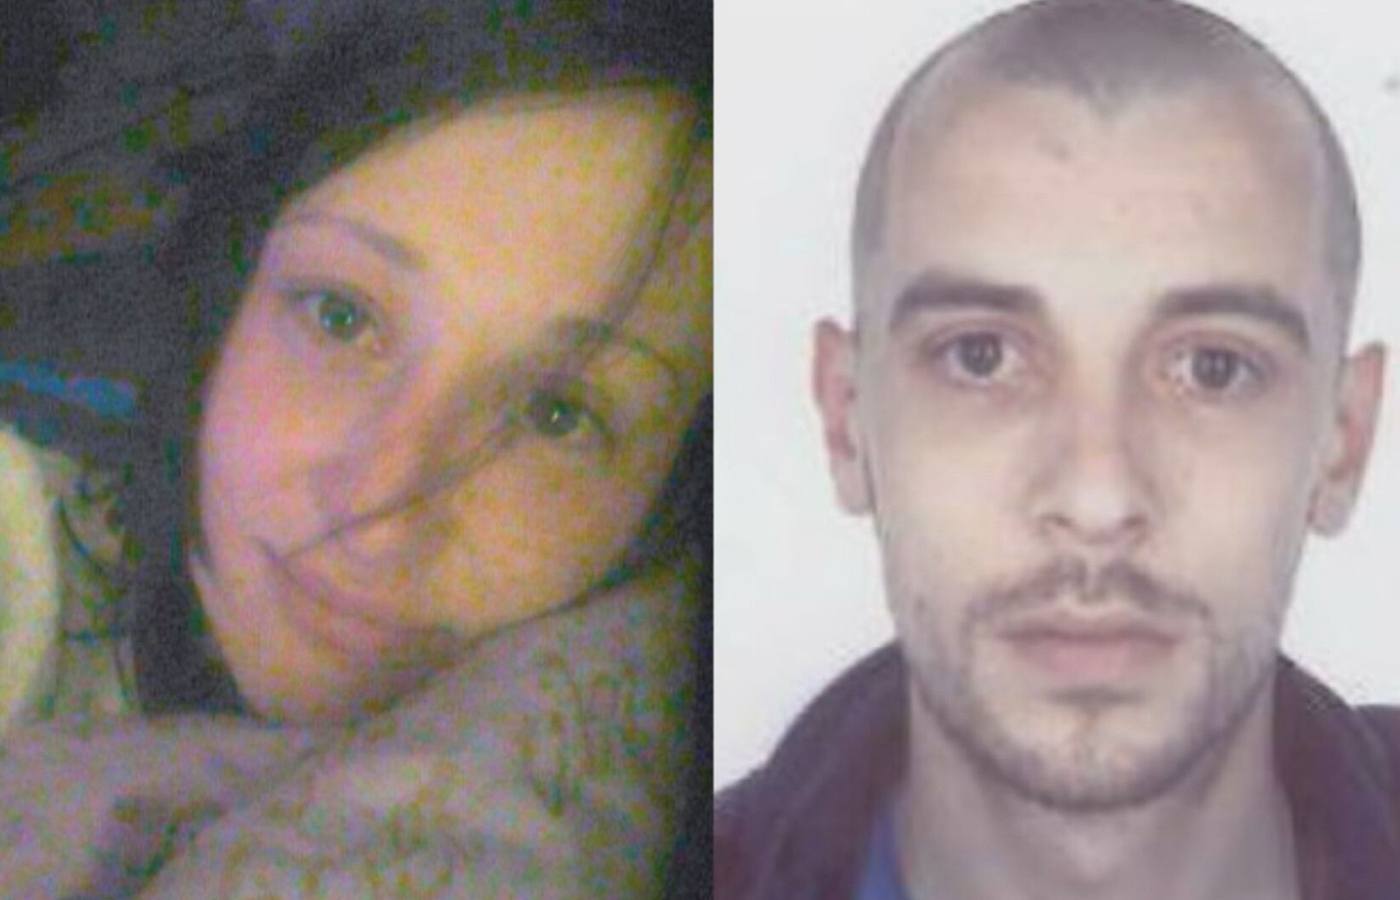 John Yuill and Lamara Bell died in 2015 after crashing on the M9.